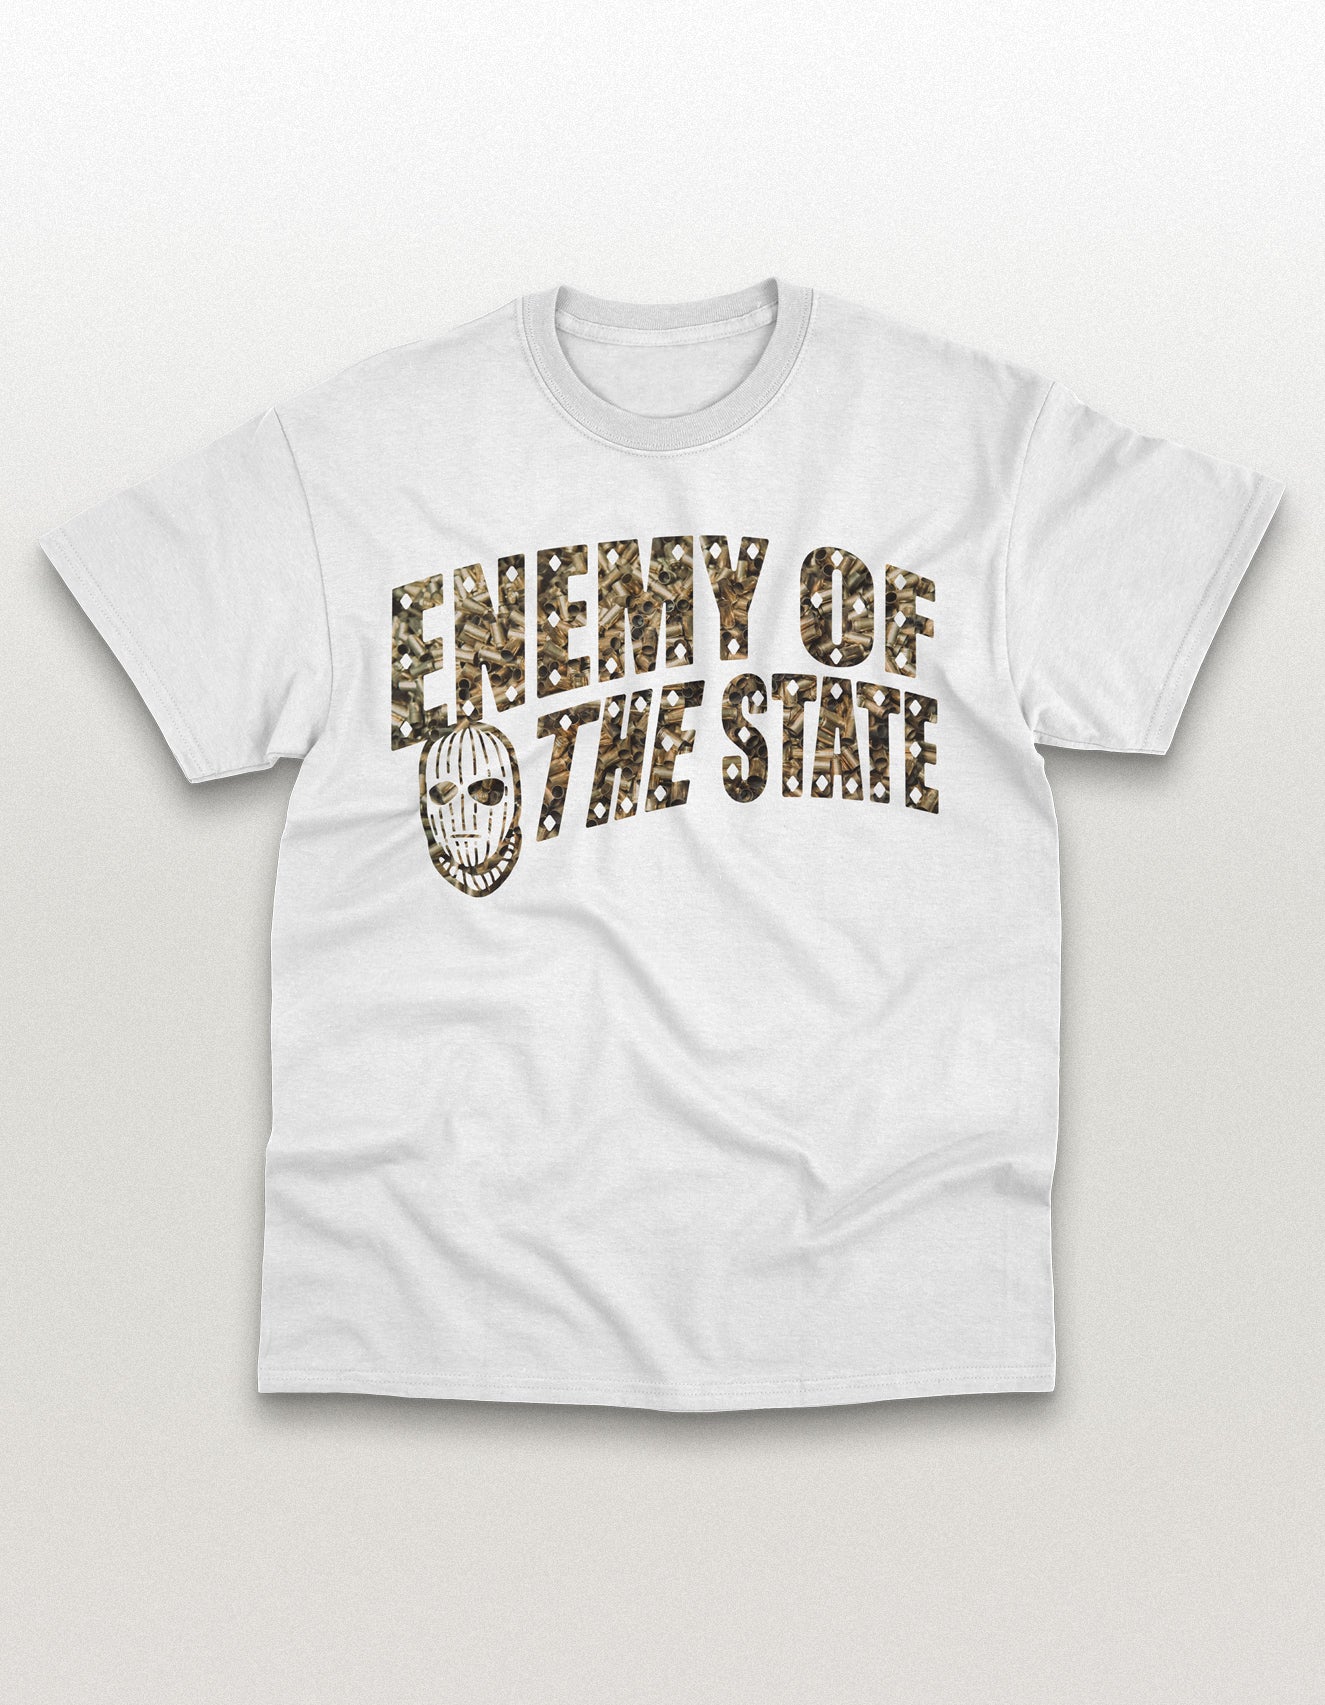 NOT A DRI FIT - Enemy Shell Casings Mid-Weight Cotton T-Shirt